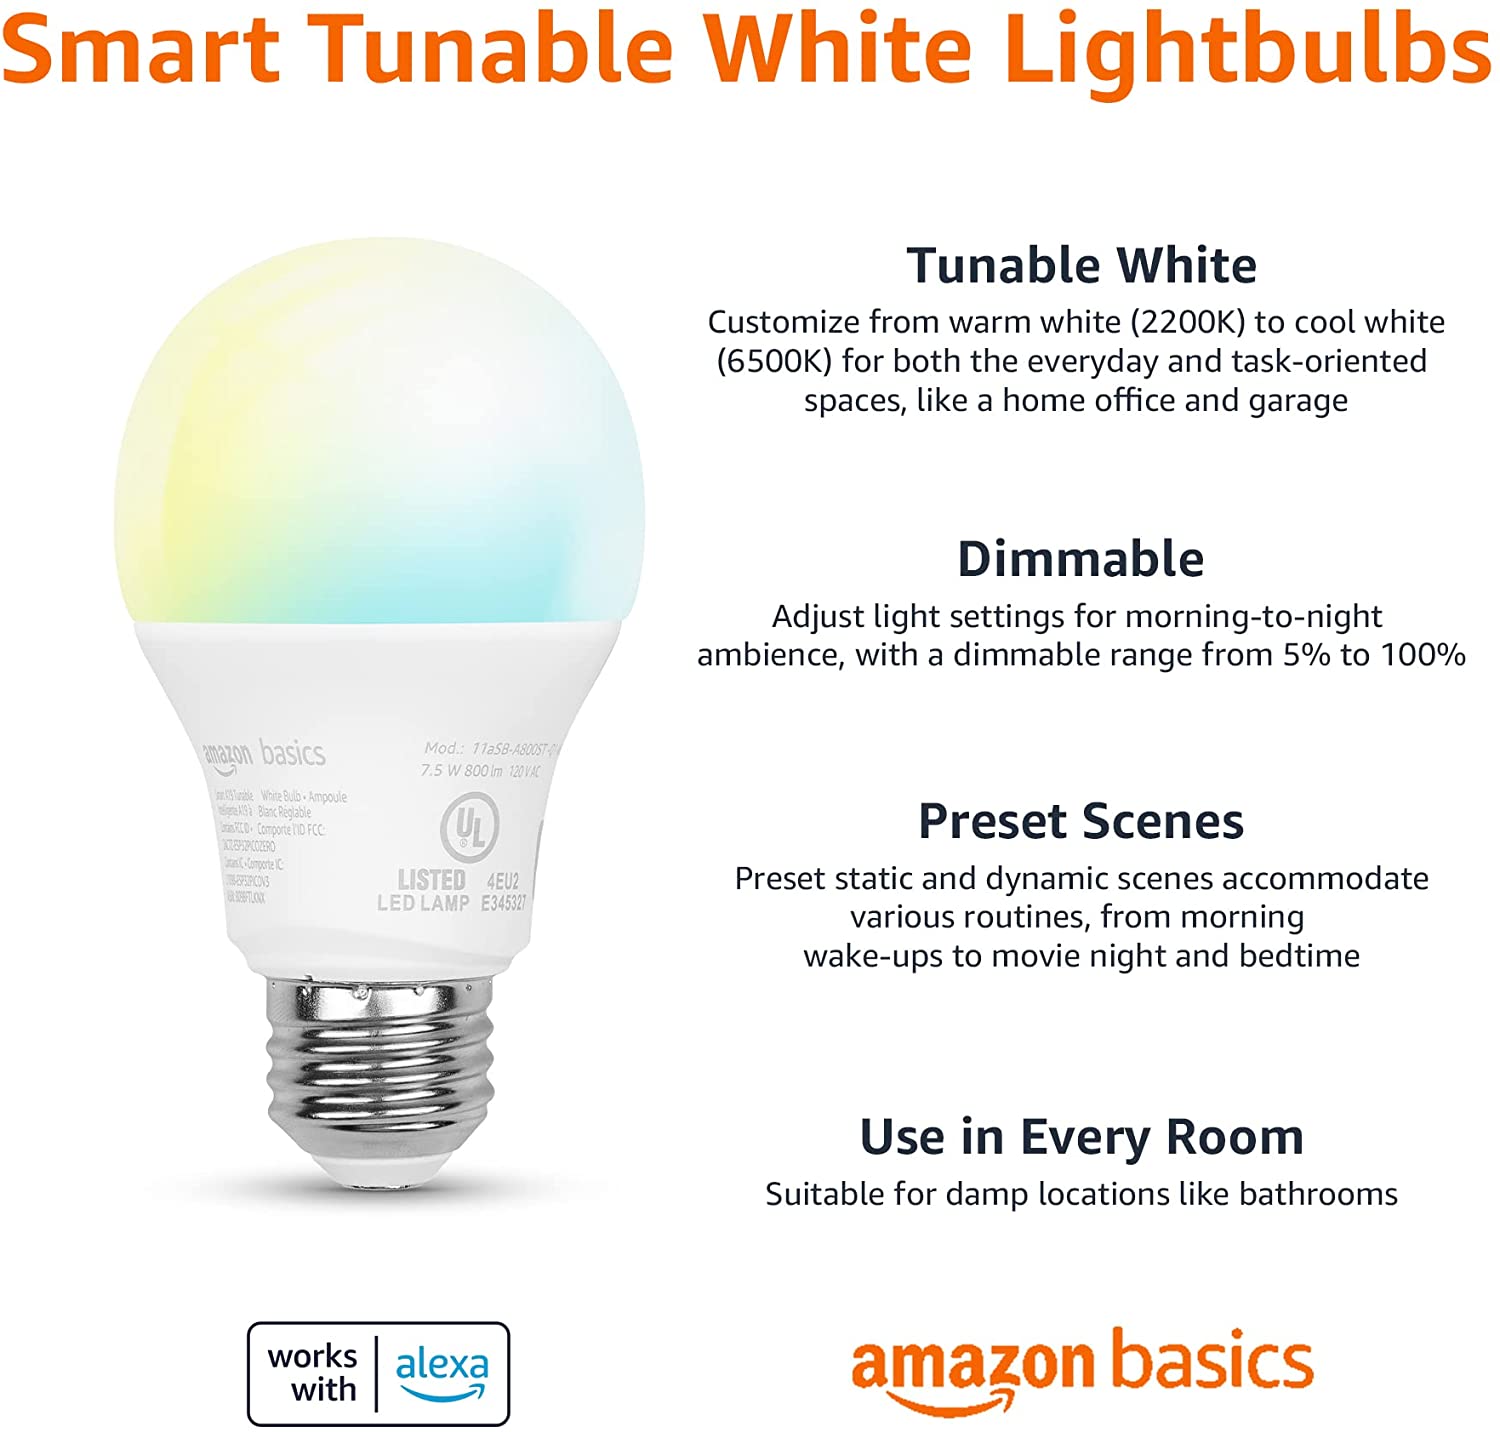 Amazon Basics Smart A19 LED Light Bulb, Color Changing, 2.4 GHz Wi-Fi, 60W Equivalent 800LM, Works with Alexa Only, 1-Pack, Certified for Humans